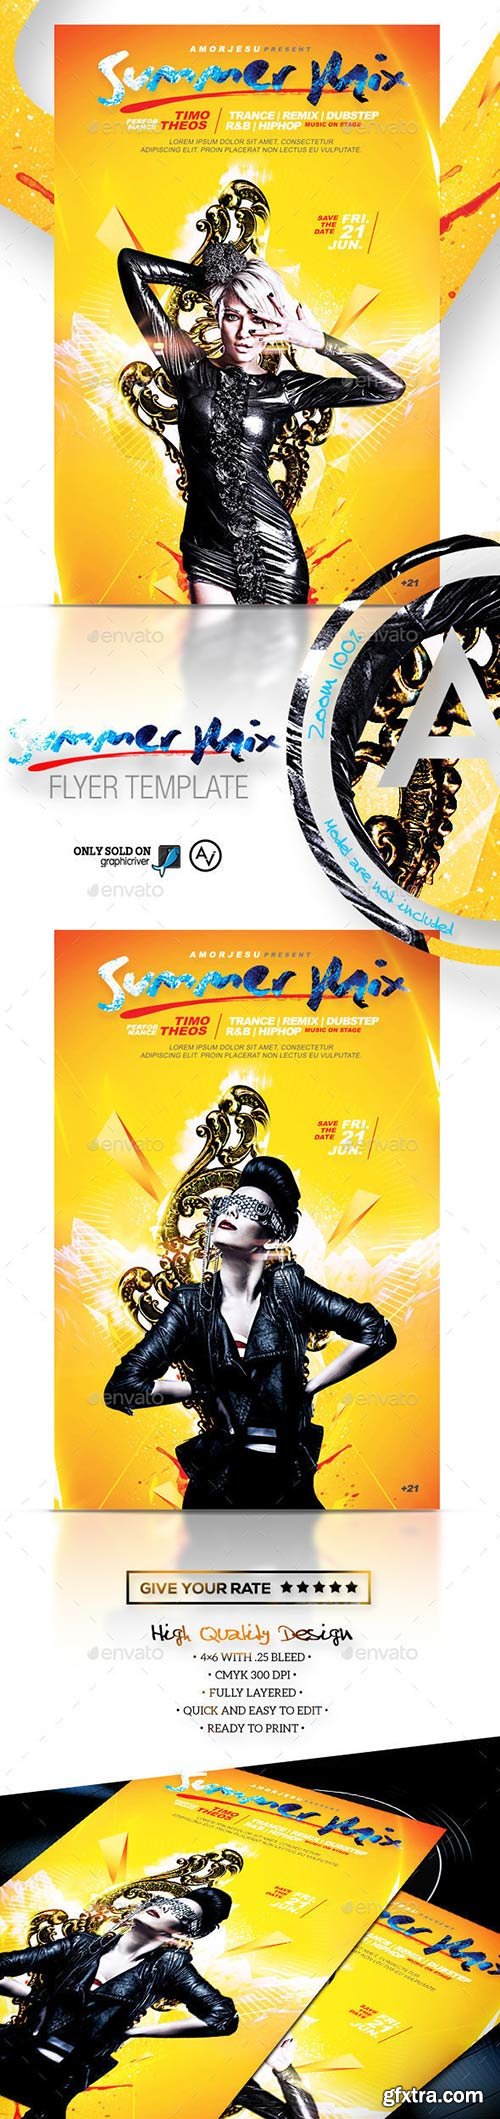 Graphicriver - Summer Mix Flyer Template 11683089